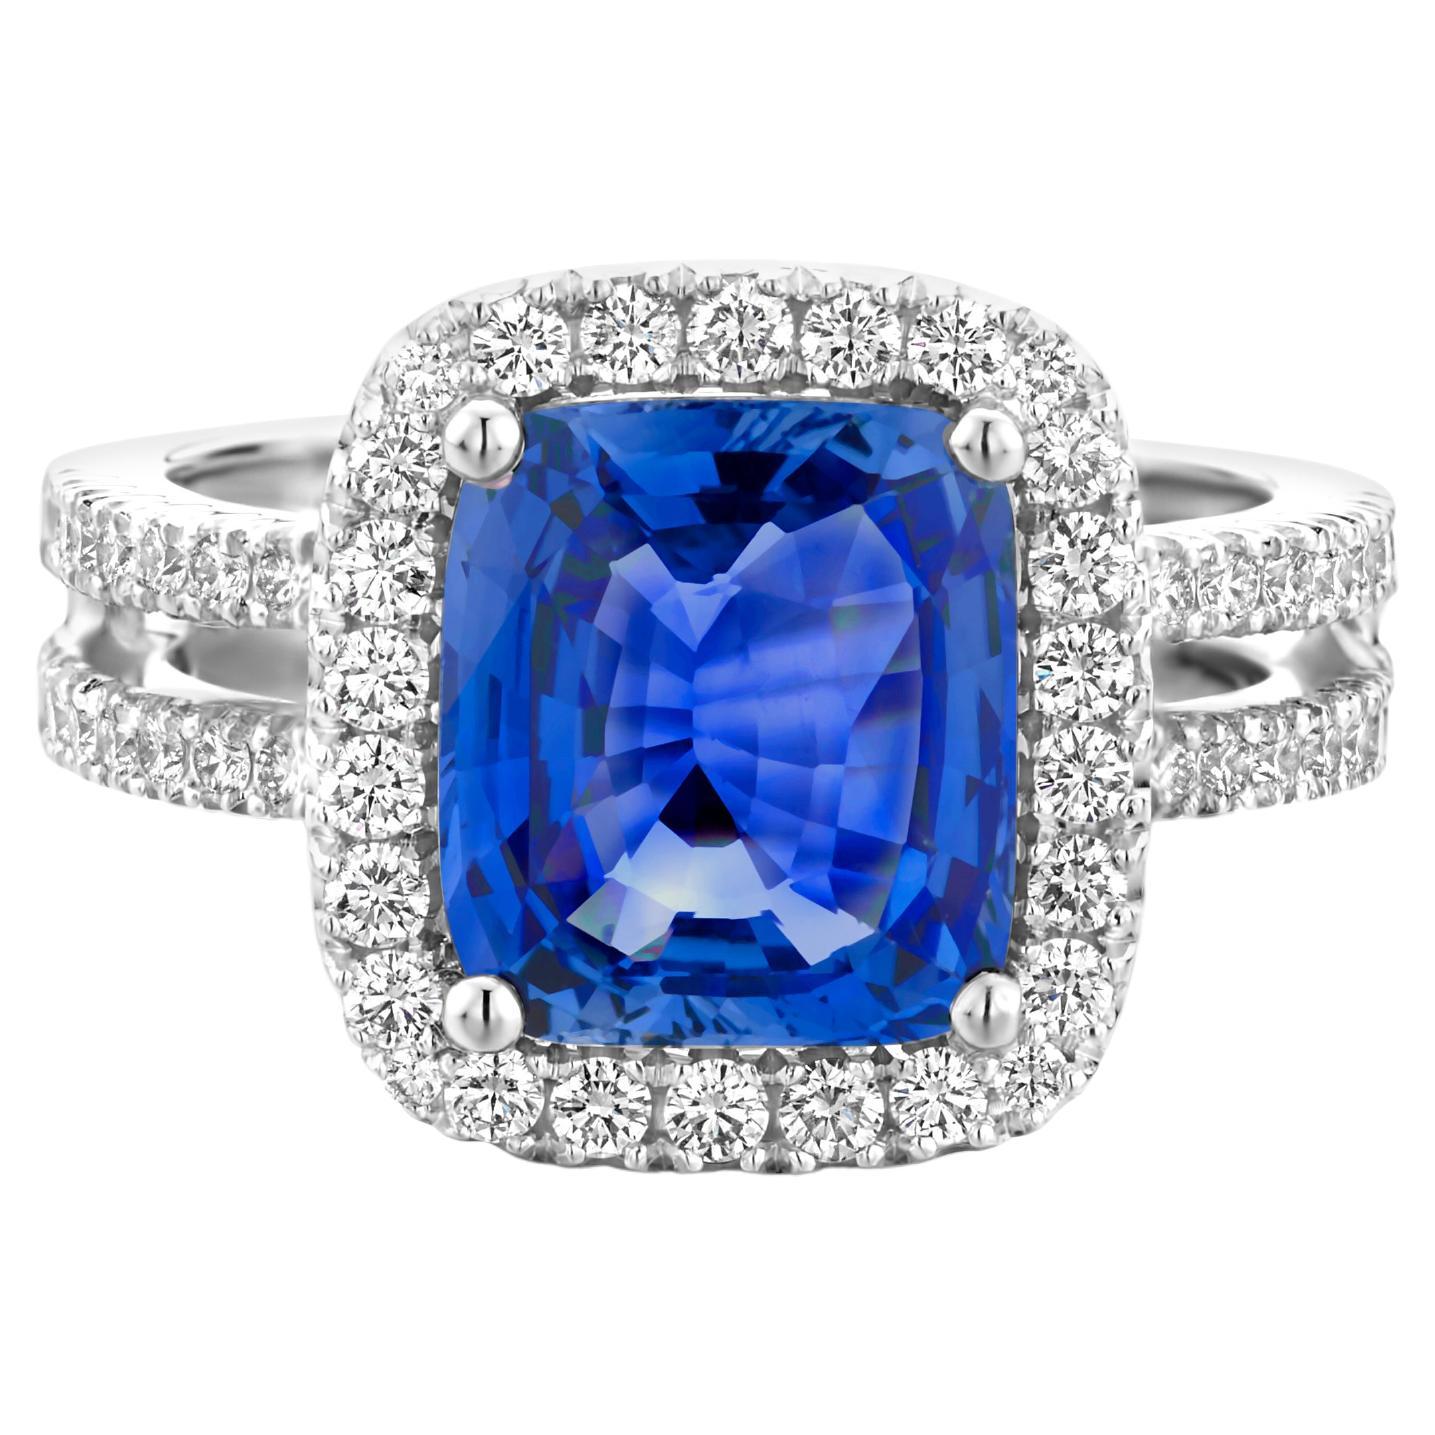 GIA Certified 4.05ct Cornflower Blue Sapphire & Diamond White Gold Cocktail Ring